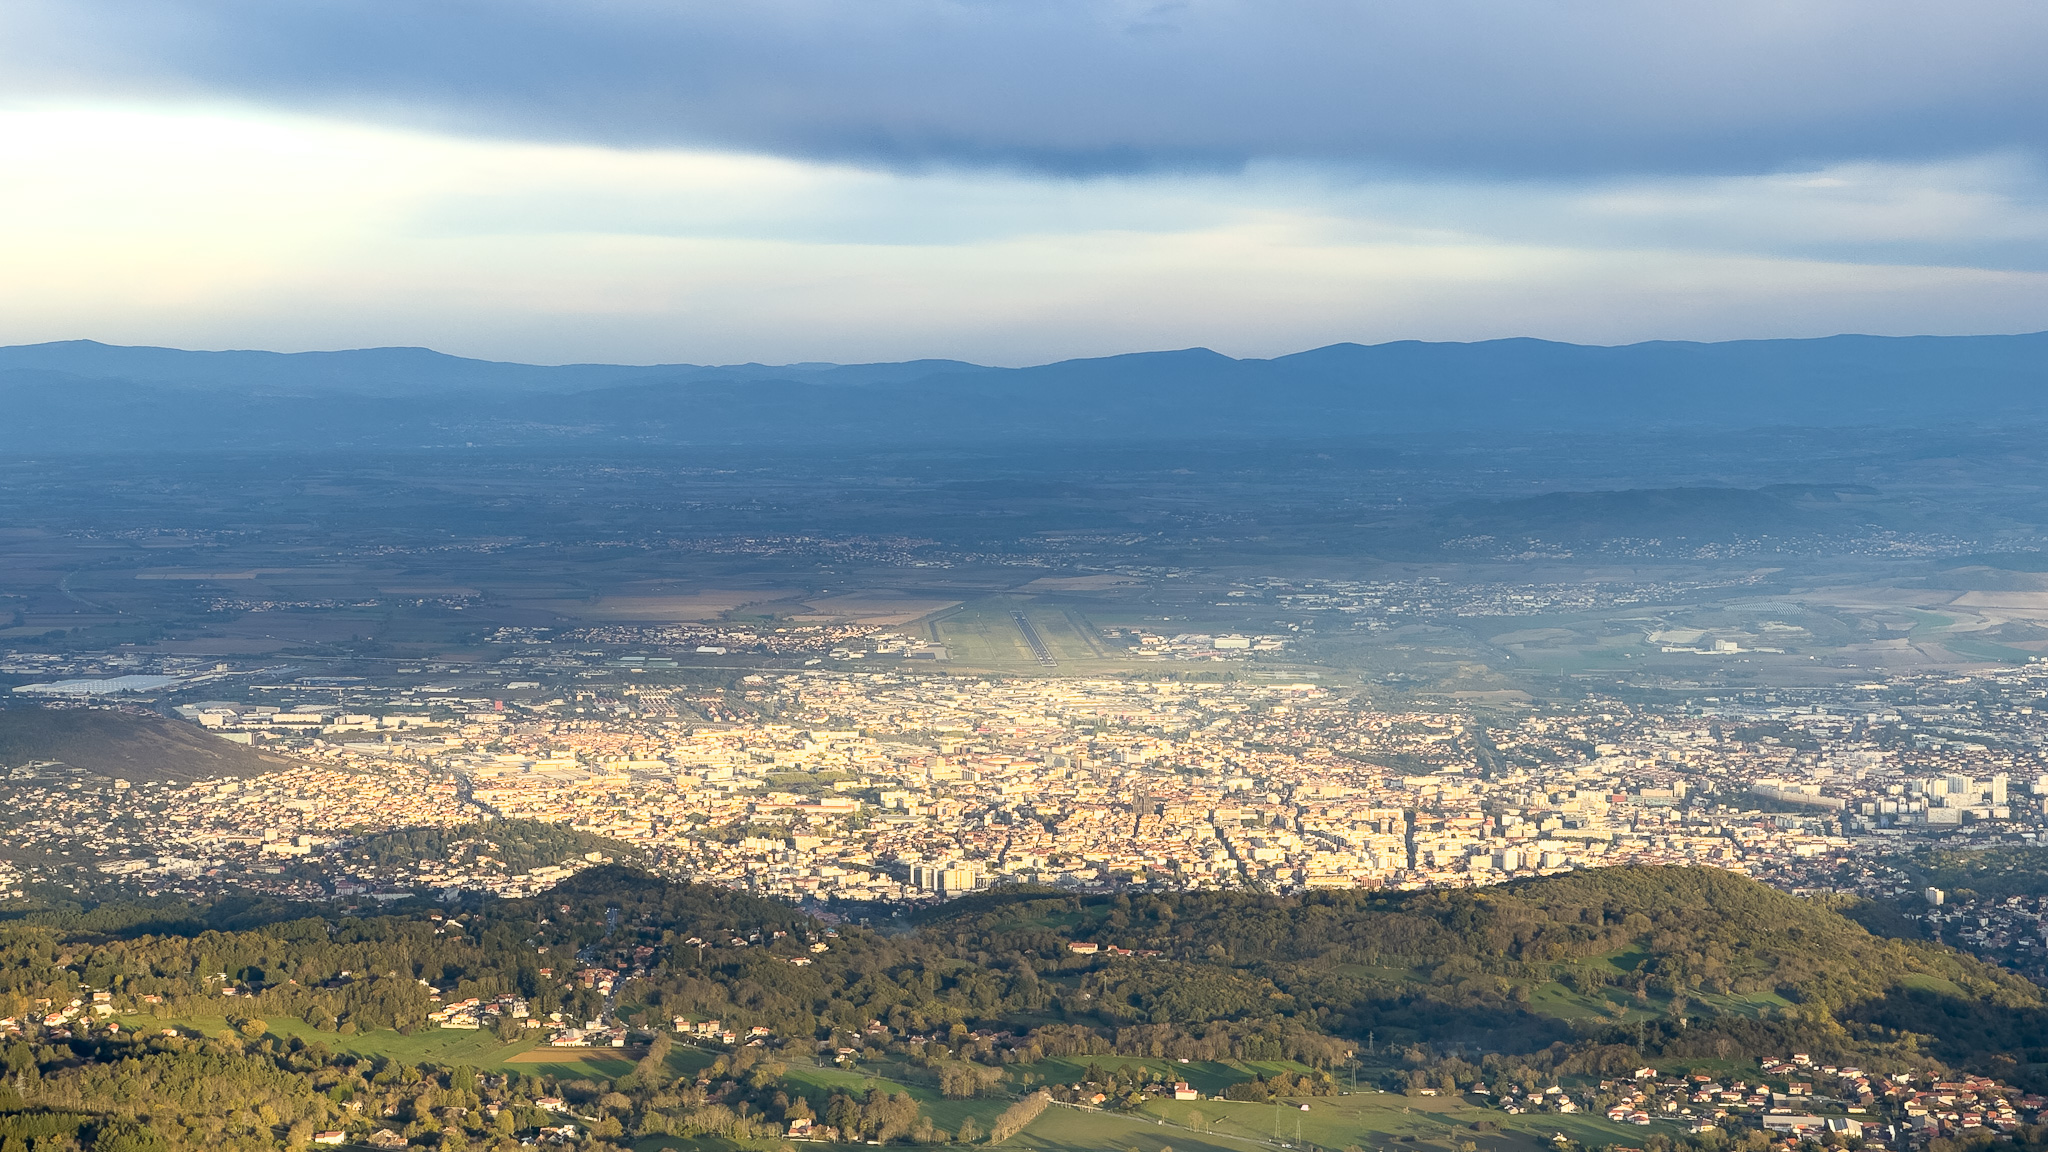 The City of Clermont Ferrand seen from the Puy de Dôme Summit